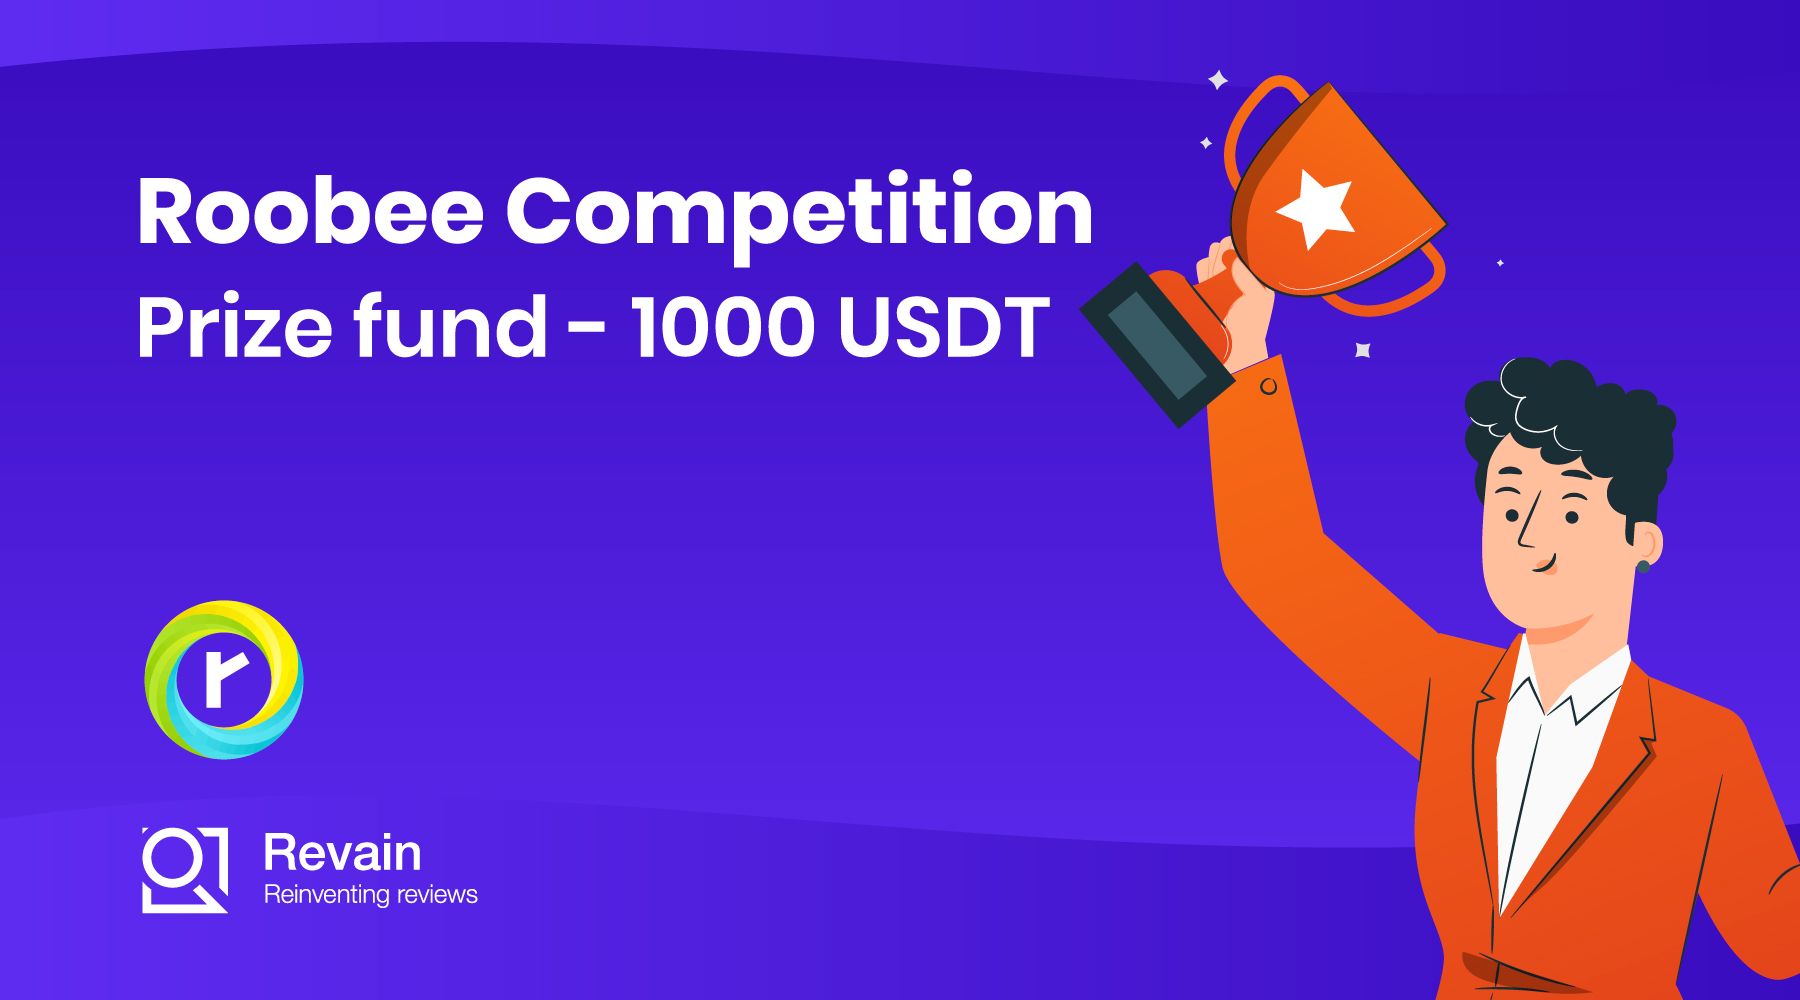 Roobee competition. Prize fund 1000!